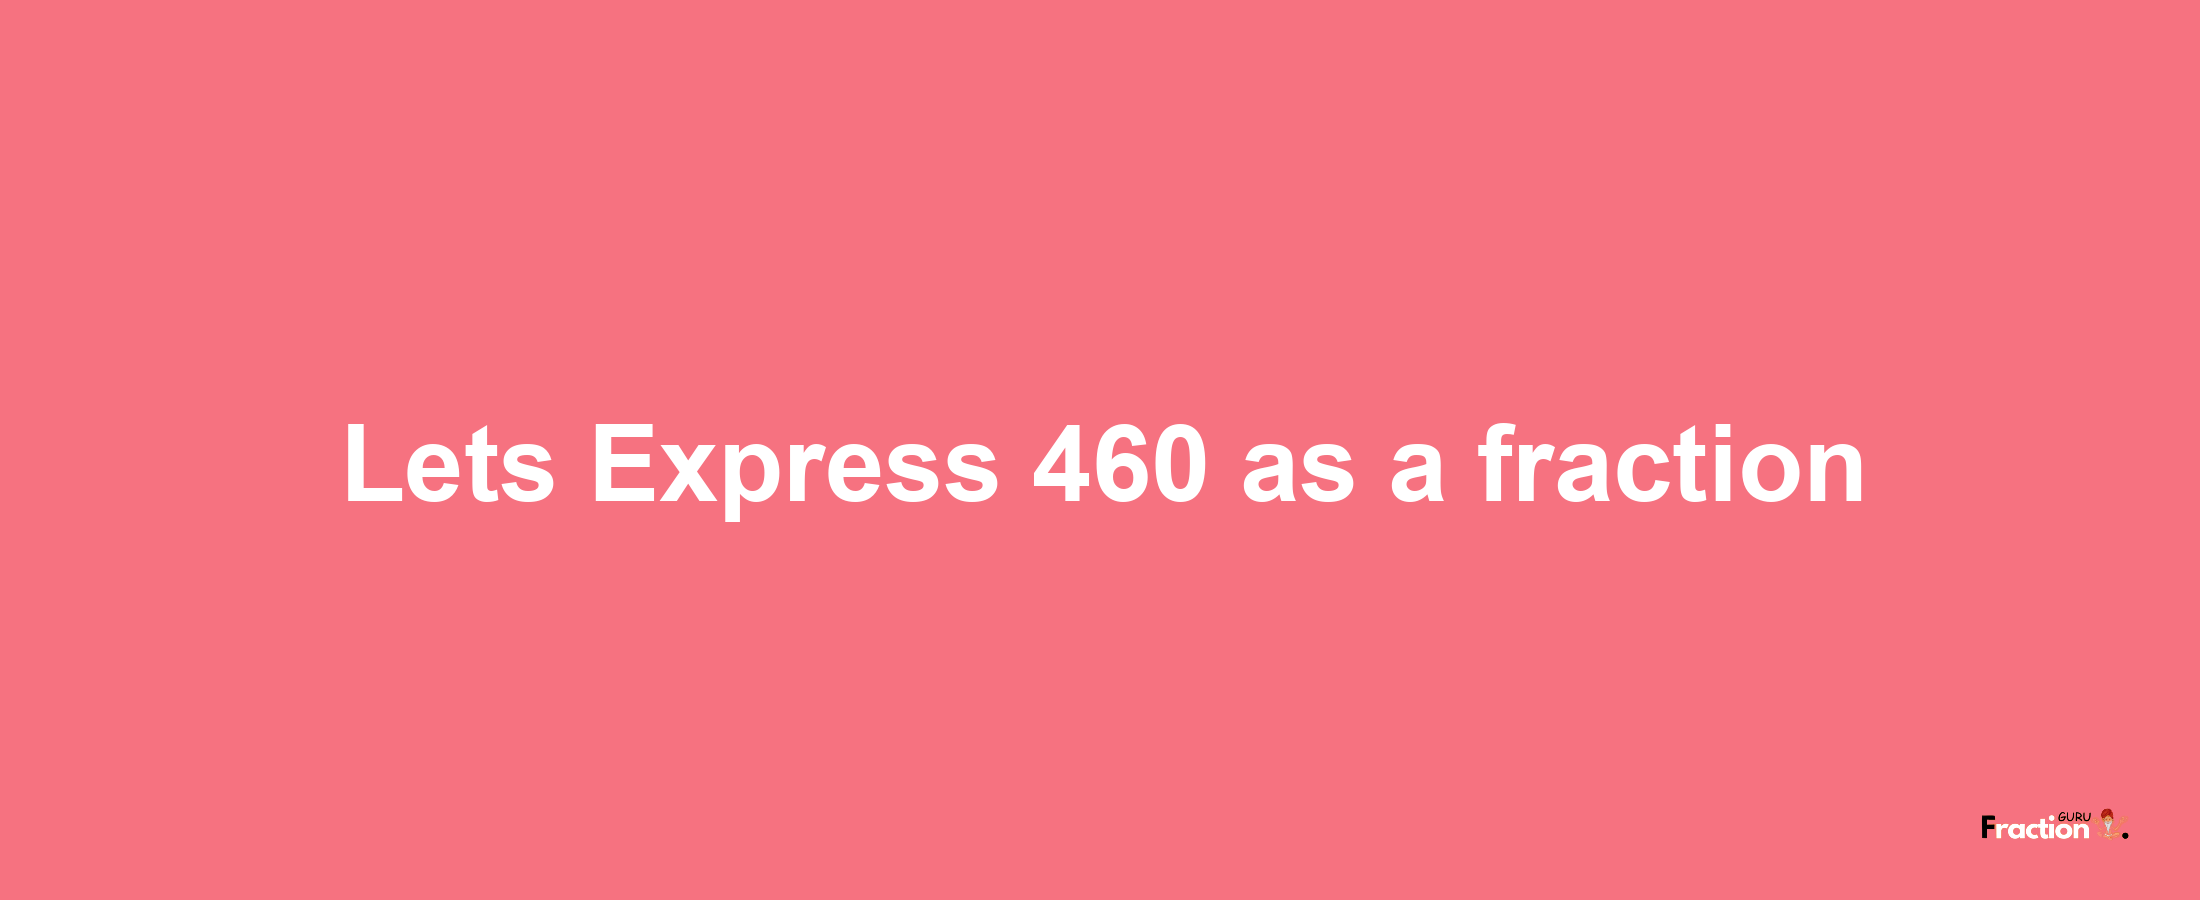 Lets Express 460 as afraction